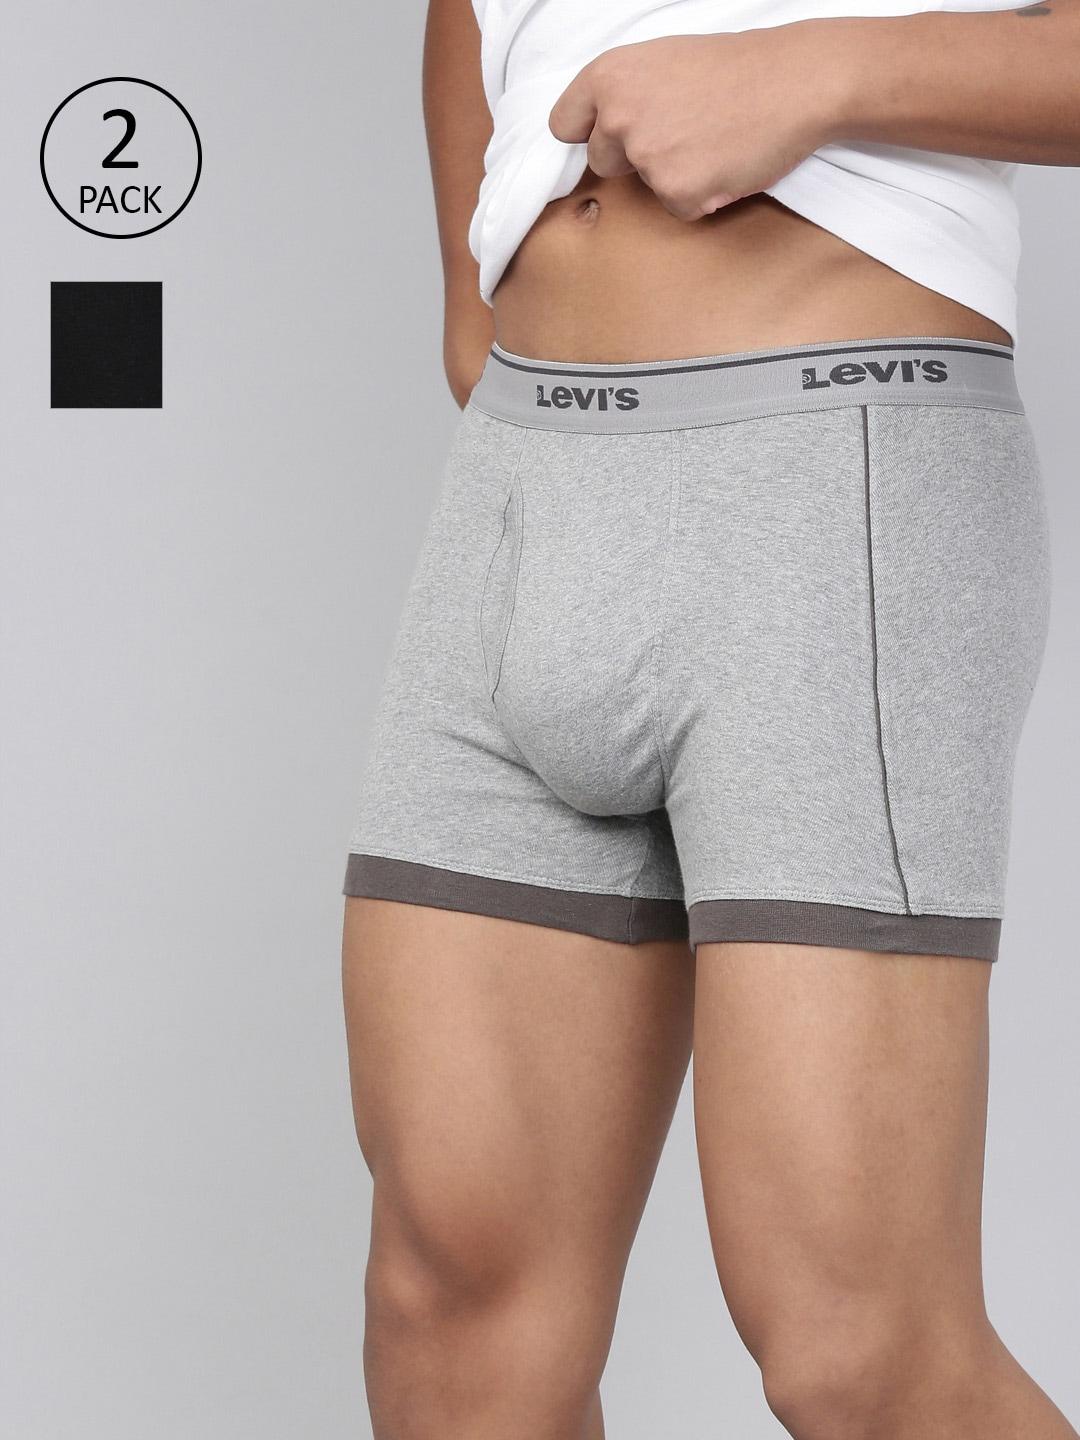 levis pack of 2 smartskin technology cotton contra boxer brief with tag free comfort-007